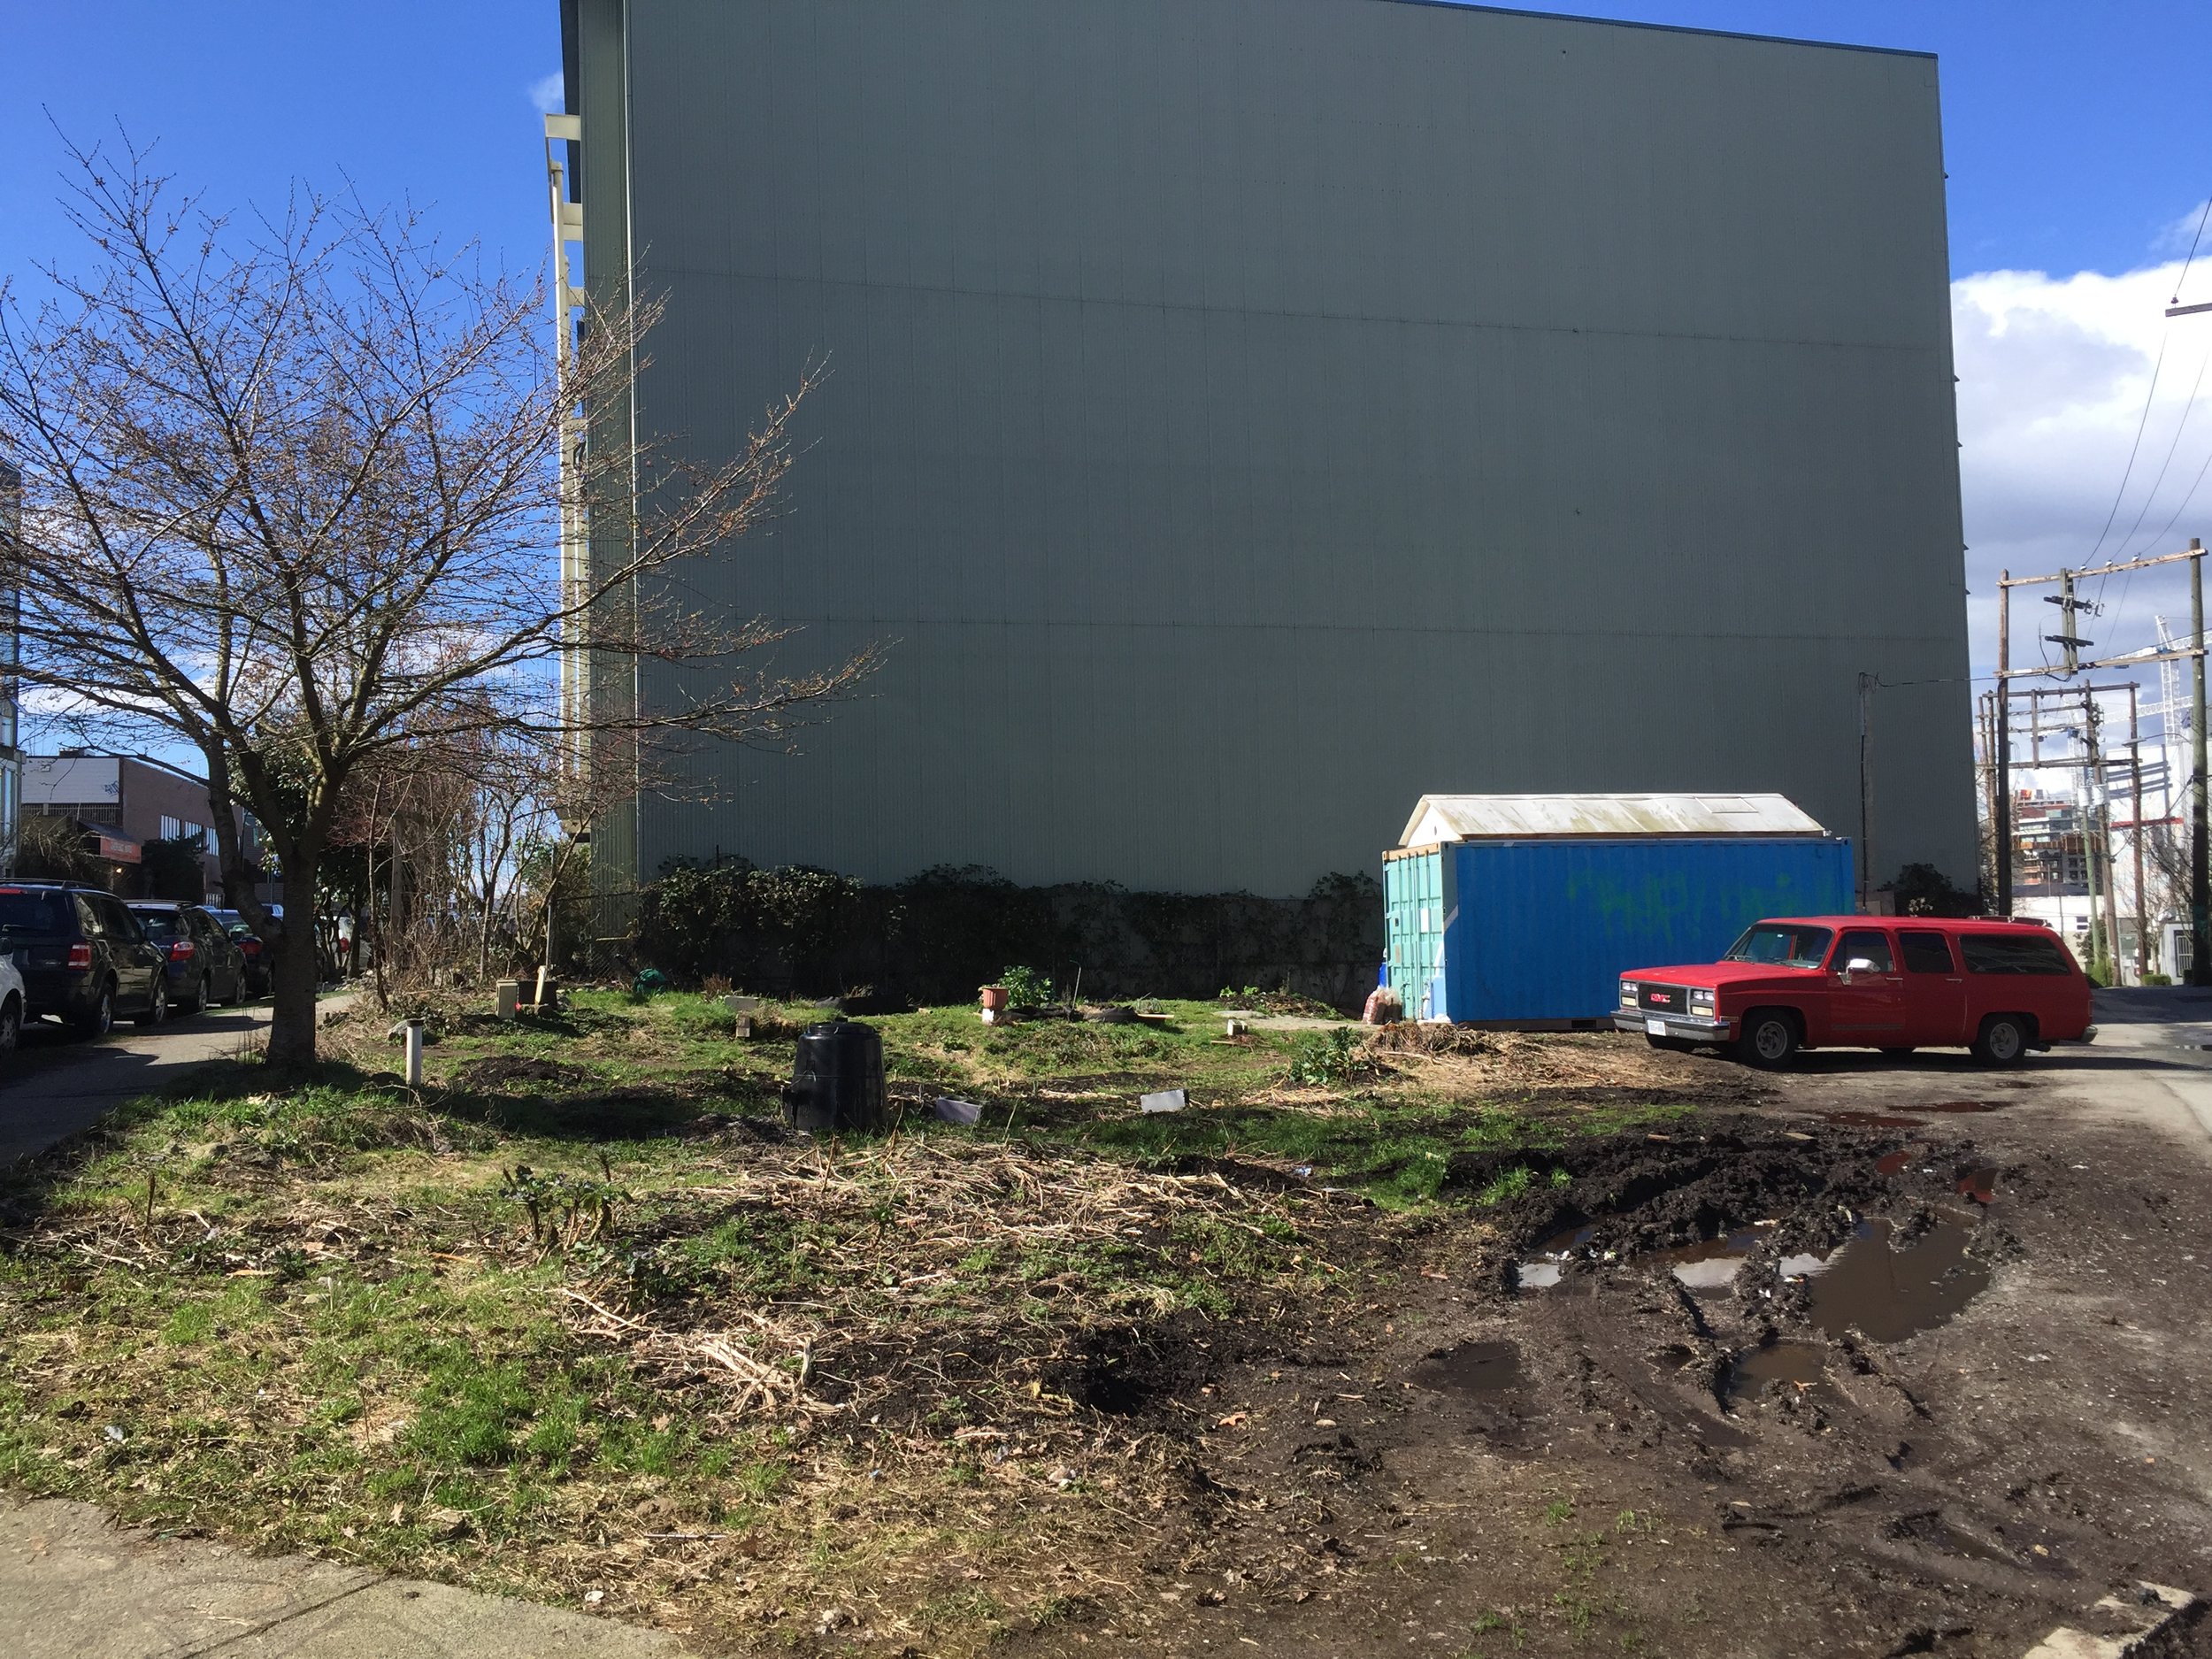 The vacant lot that would soon be home to coFood Vancouver's collaborative garden.